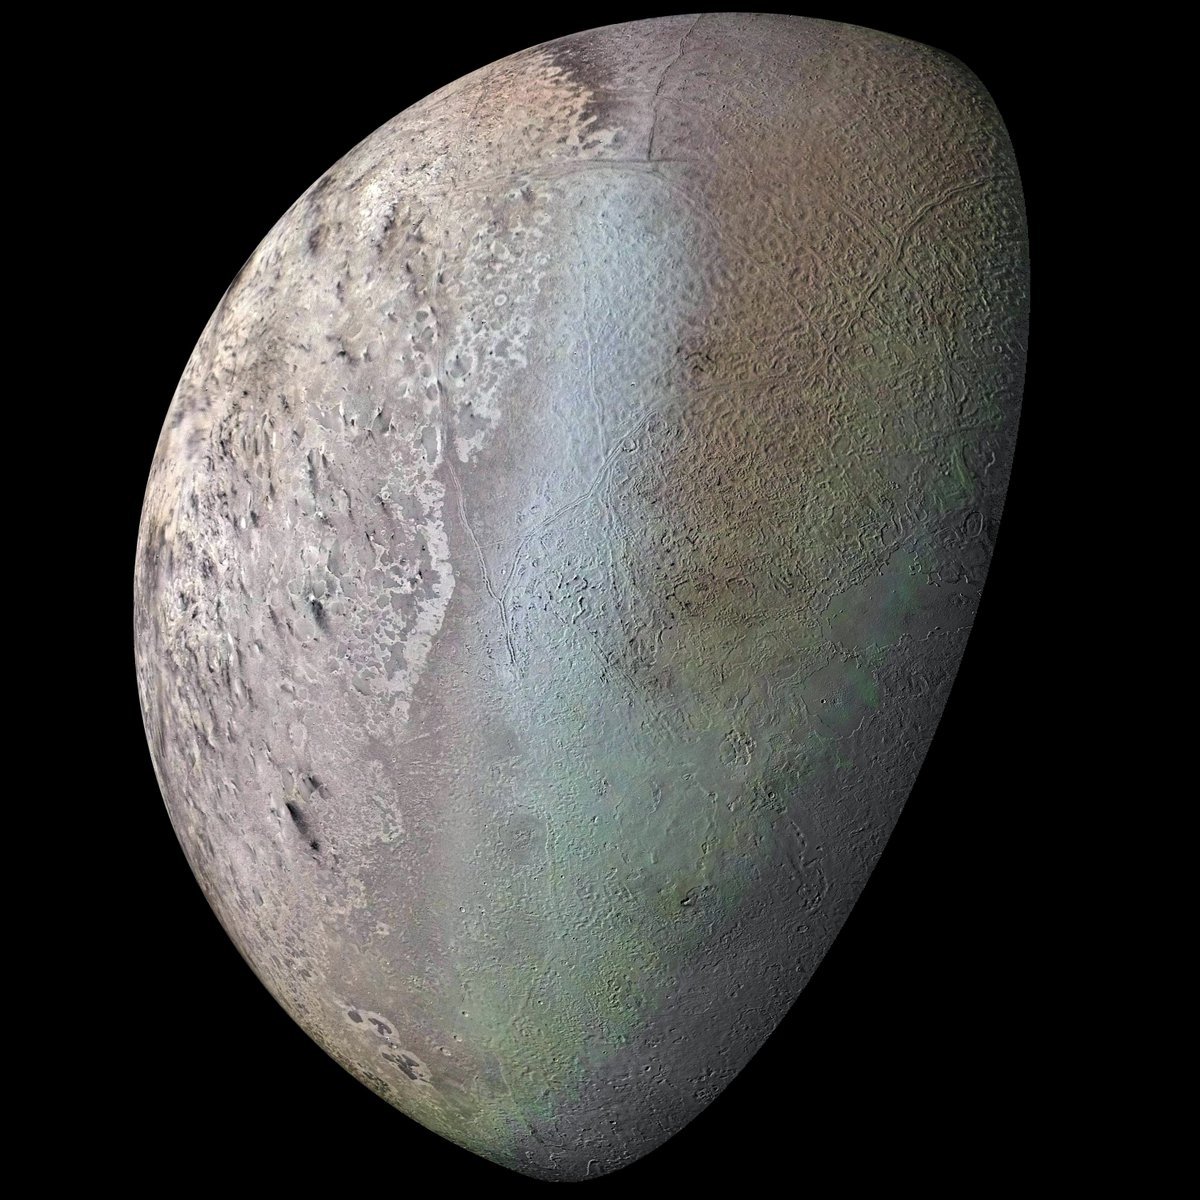 This is the only detailed image we have of Triton, by far Neptune's largest moon. It was captured in 1989 by the Voyager 2 spacecraft during its flyby of the system. I got some amazing facts about Triton for you in this thread